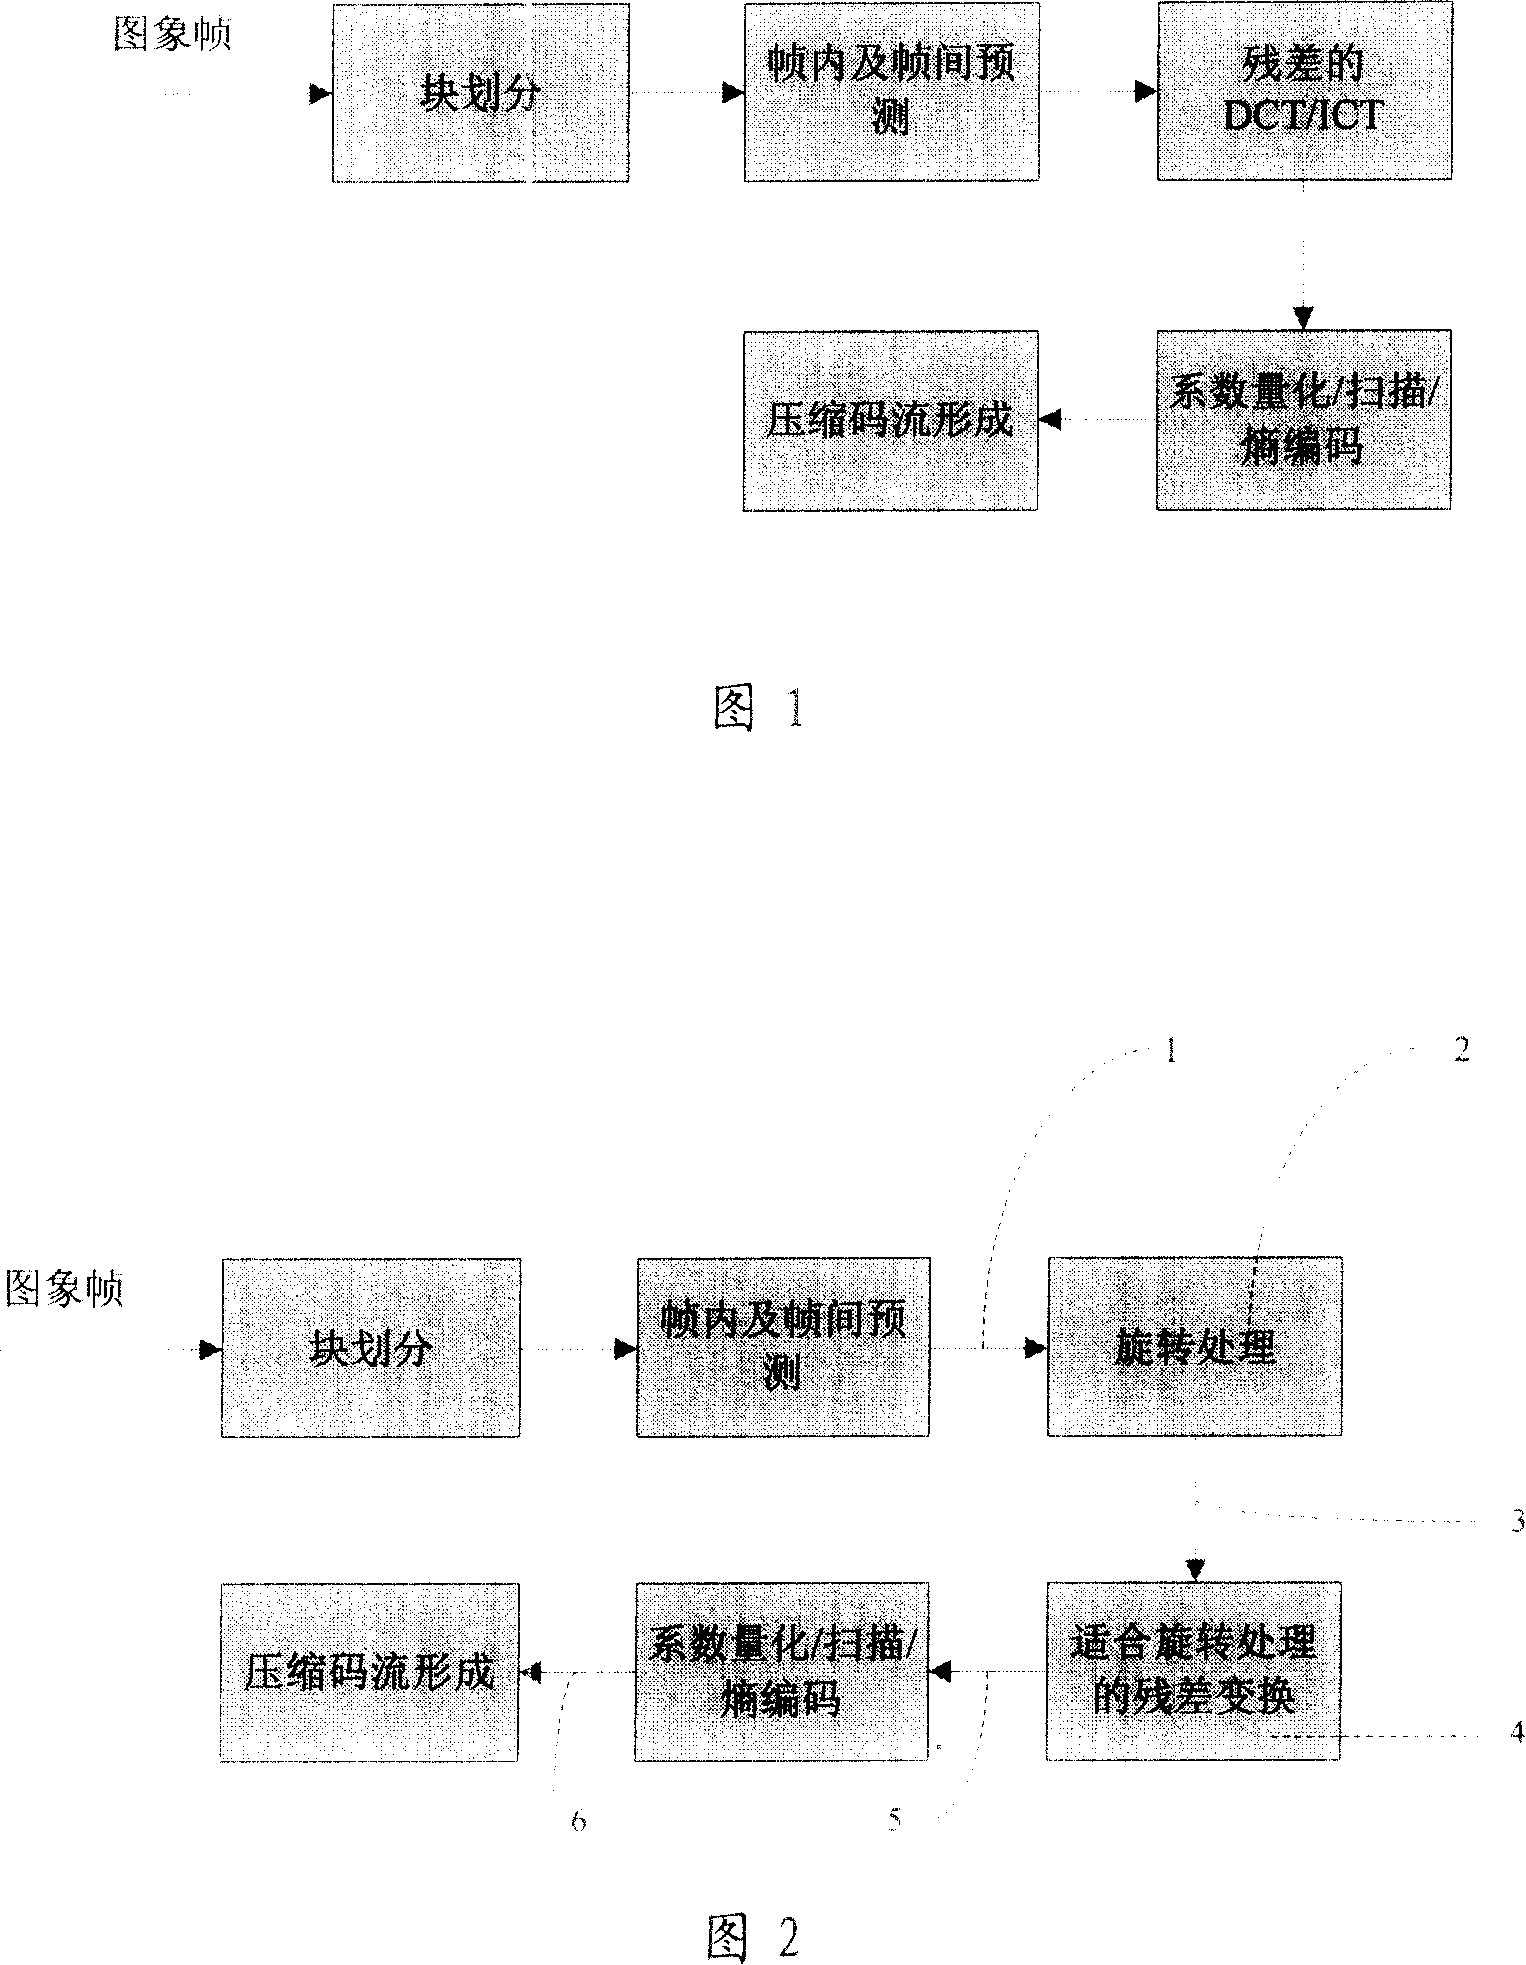 Video coding and decoding device and method based on image block data rotating and transforming